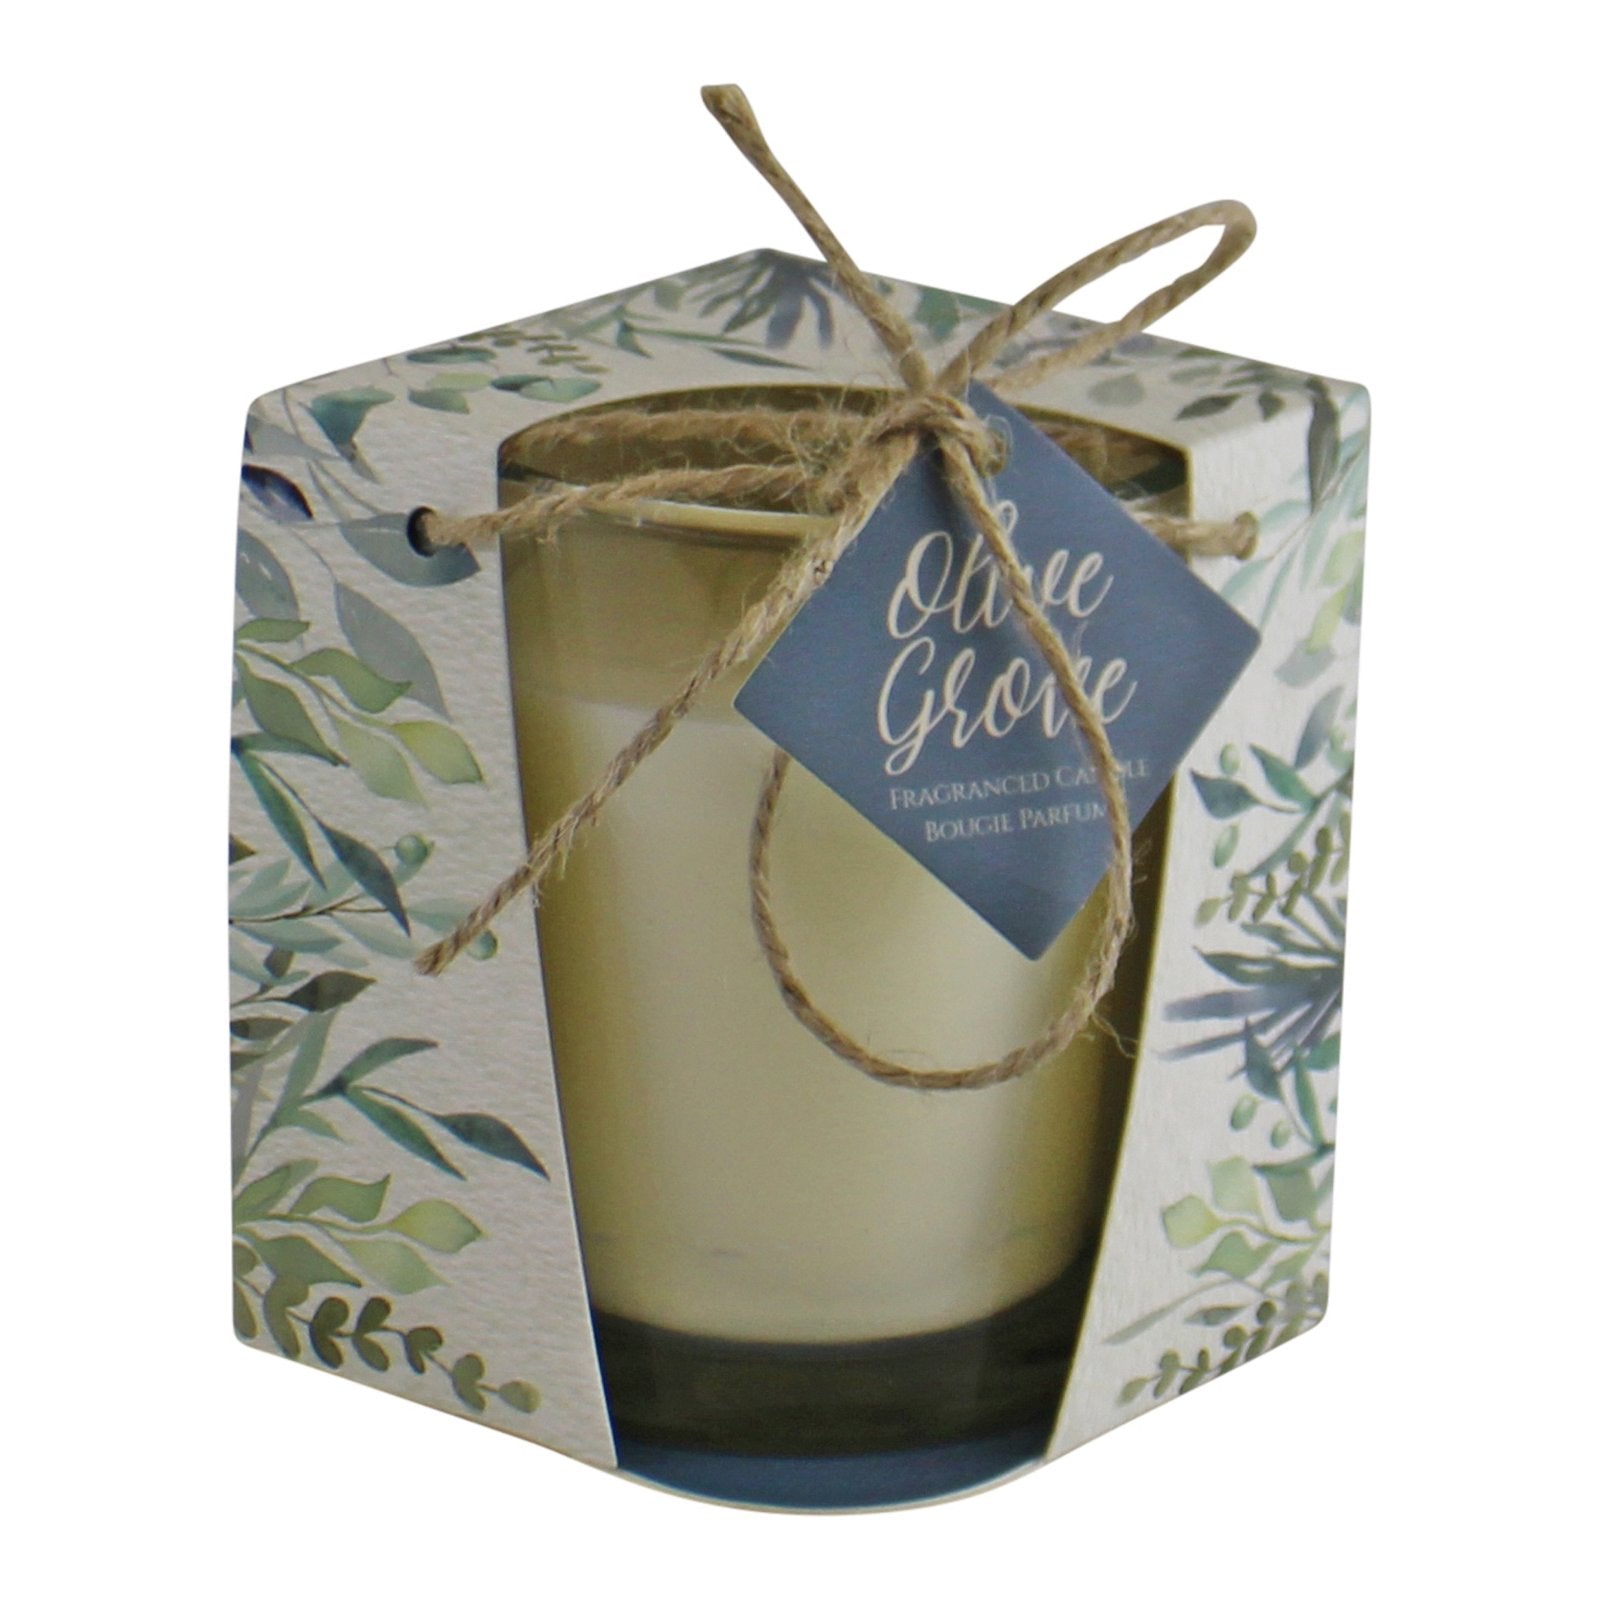 Olive Grove Fragranced Candle In Gift Box